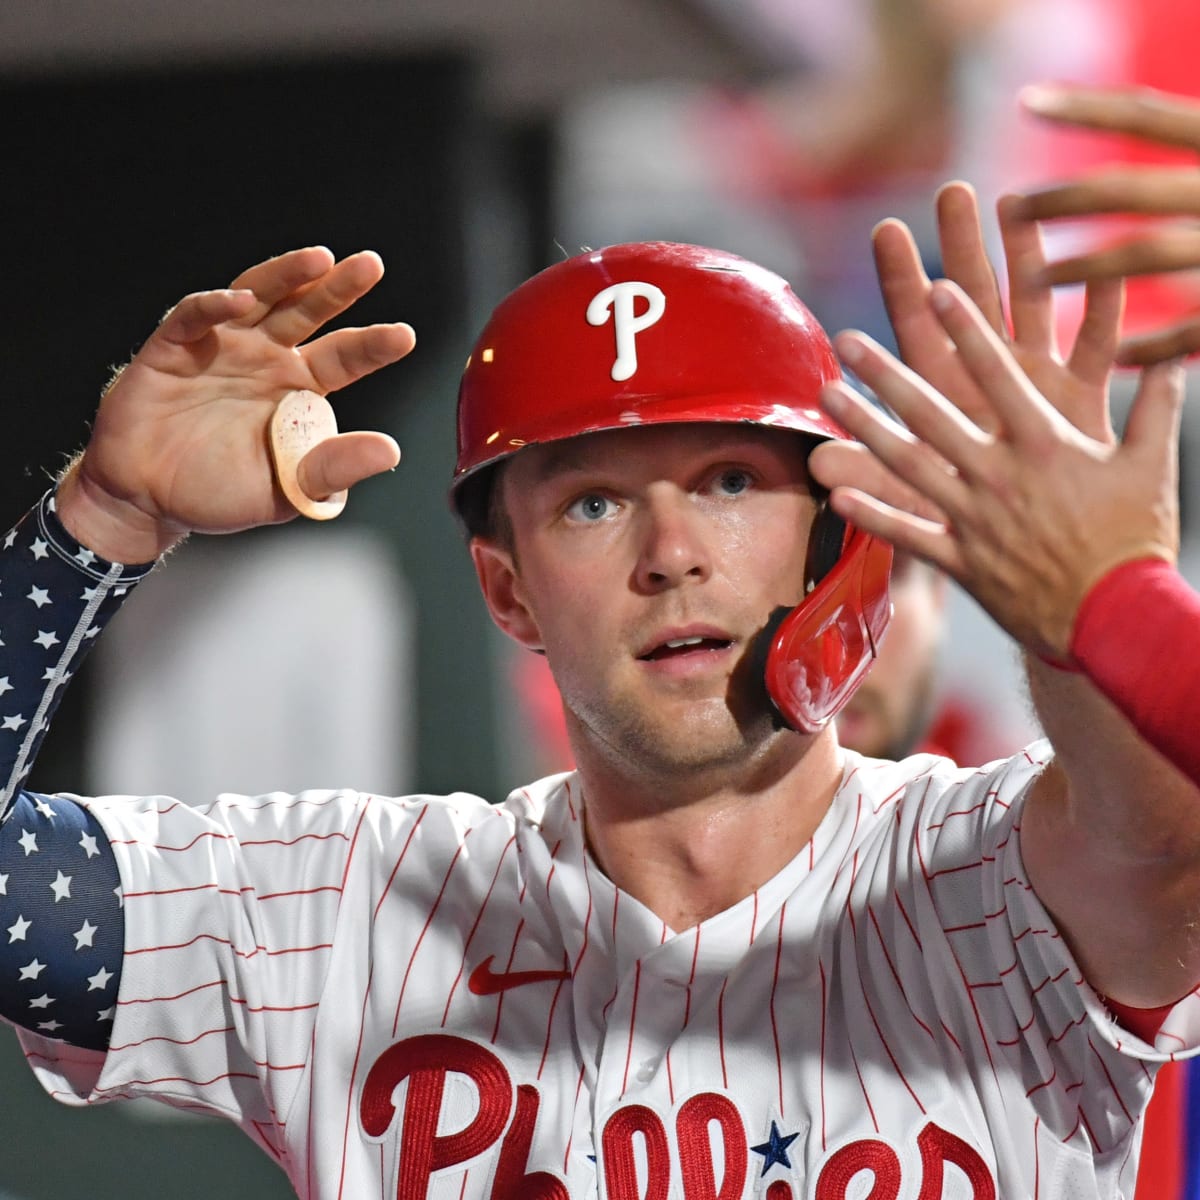 Rhys Hoskins on X: #Playersweekend jerseys are hot fire again